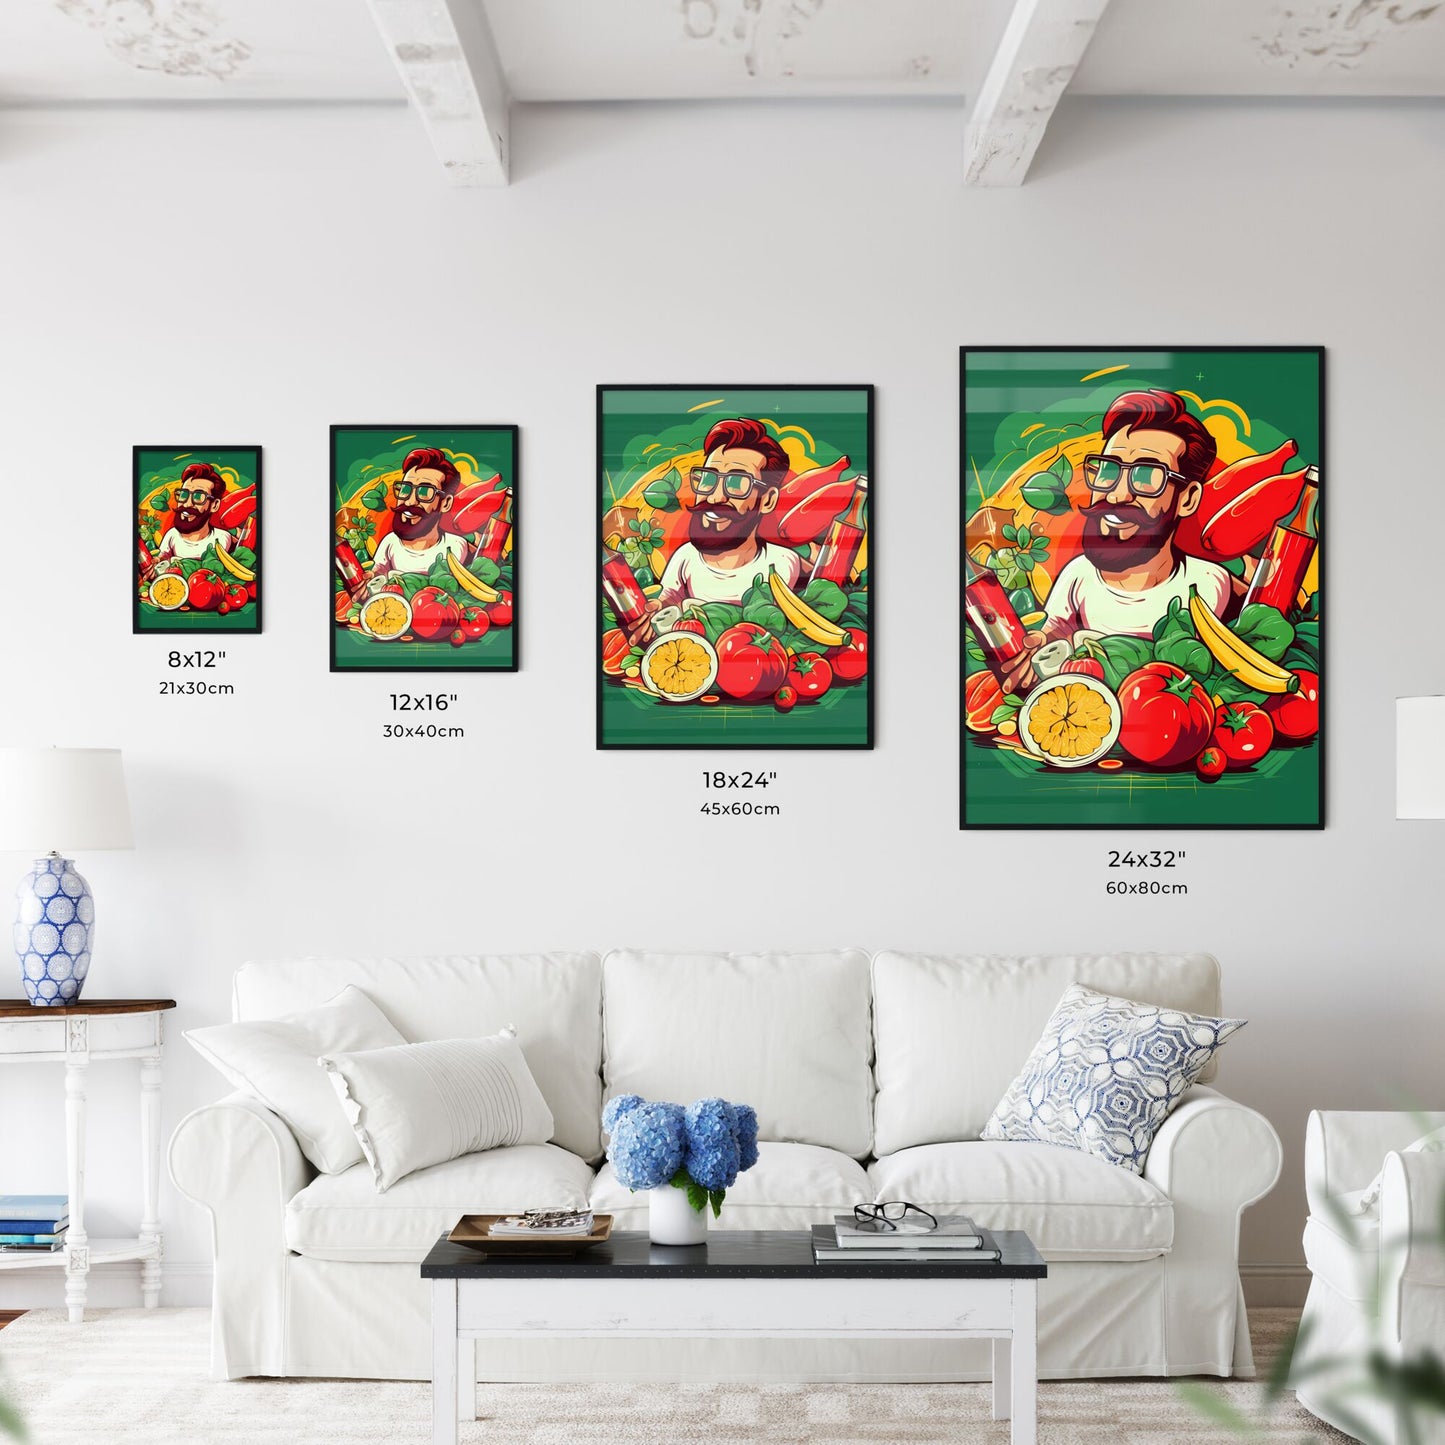 Man Holding A Variety Of Food Art Print Default Title